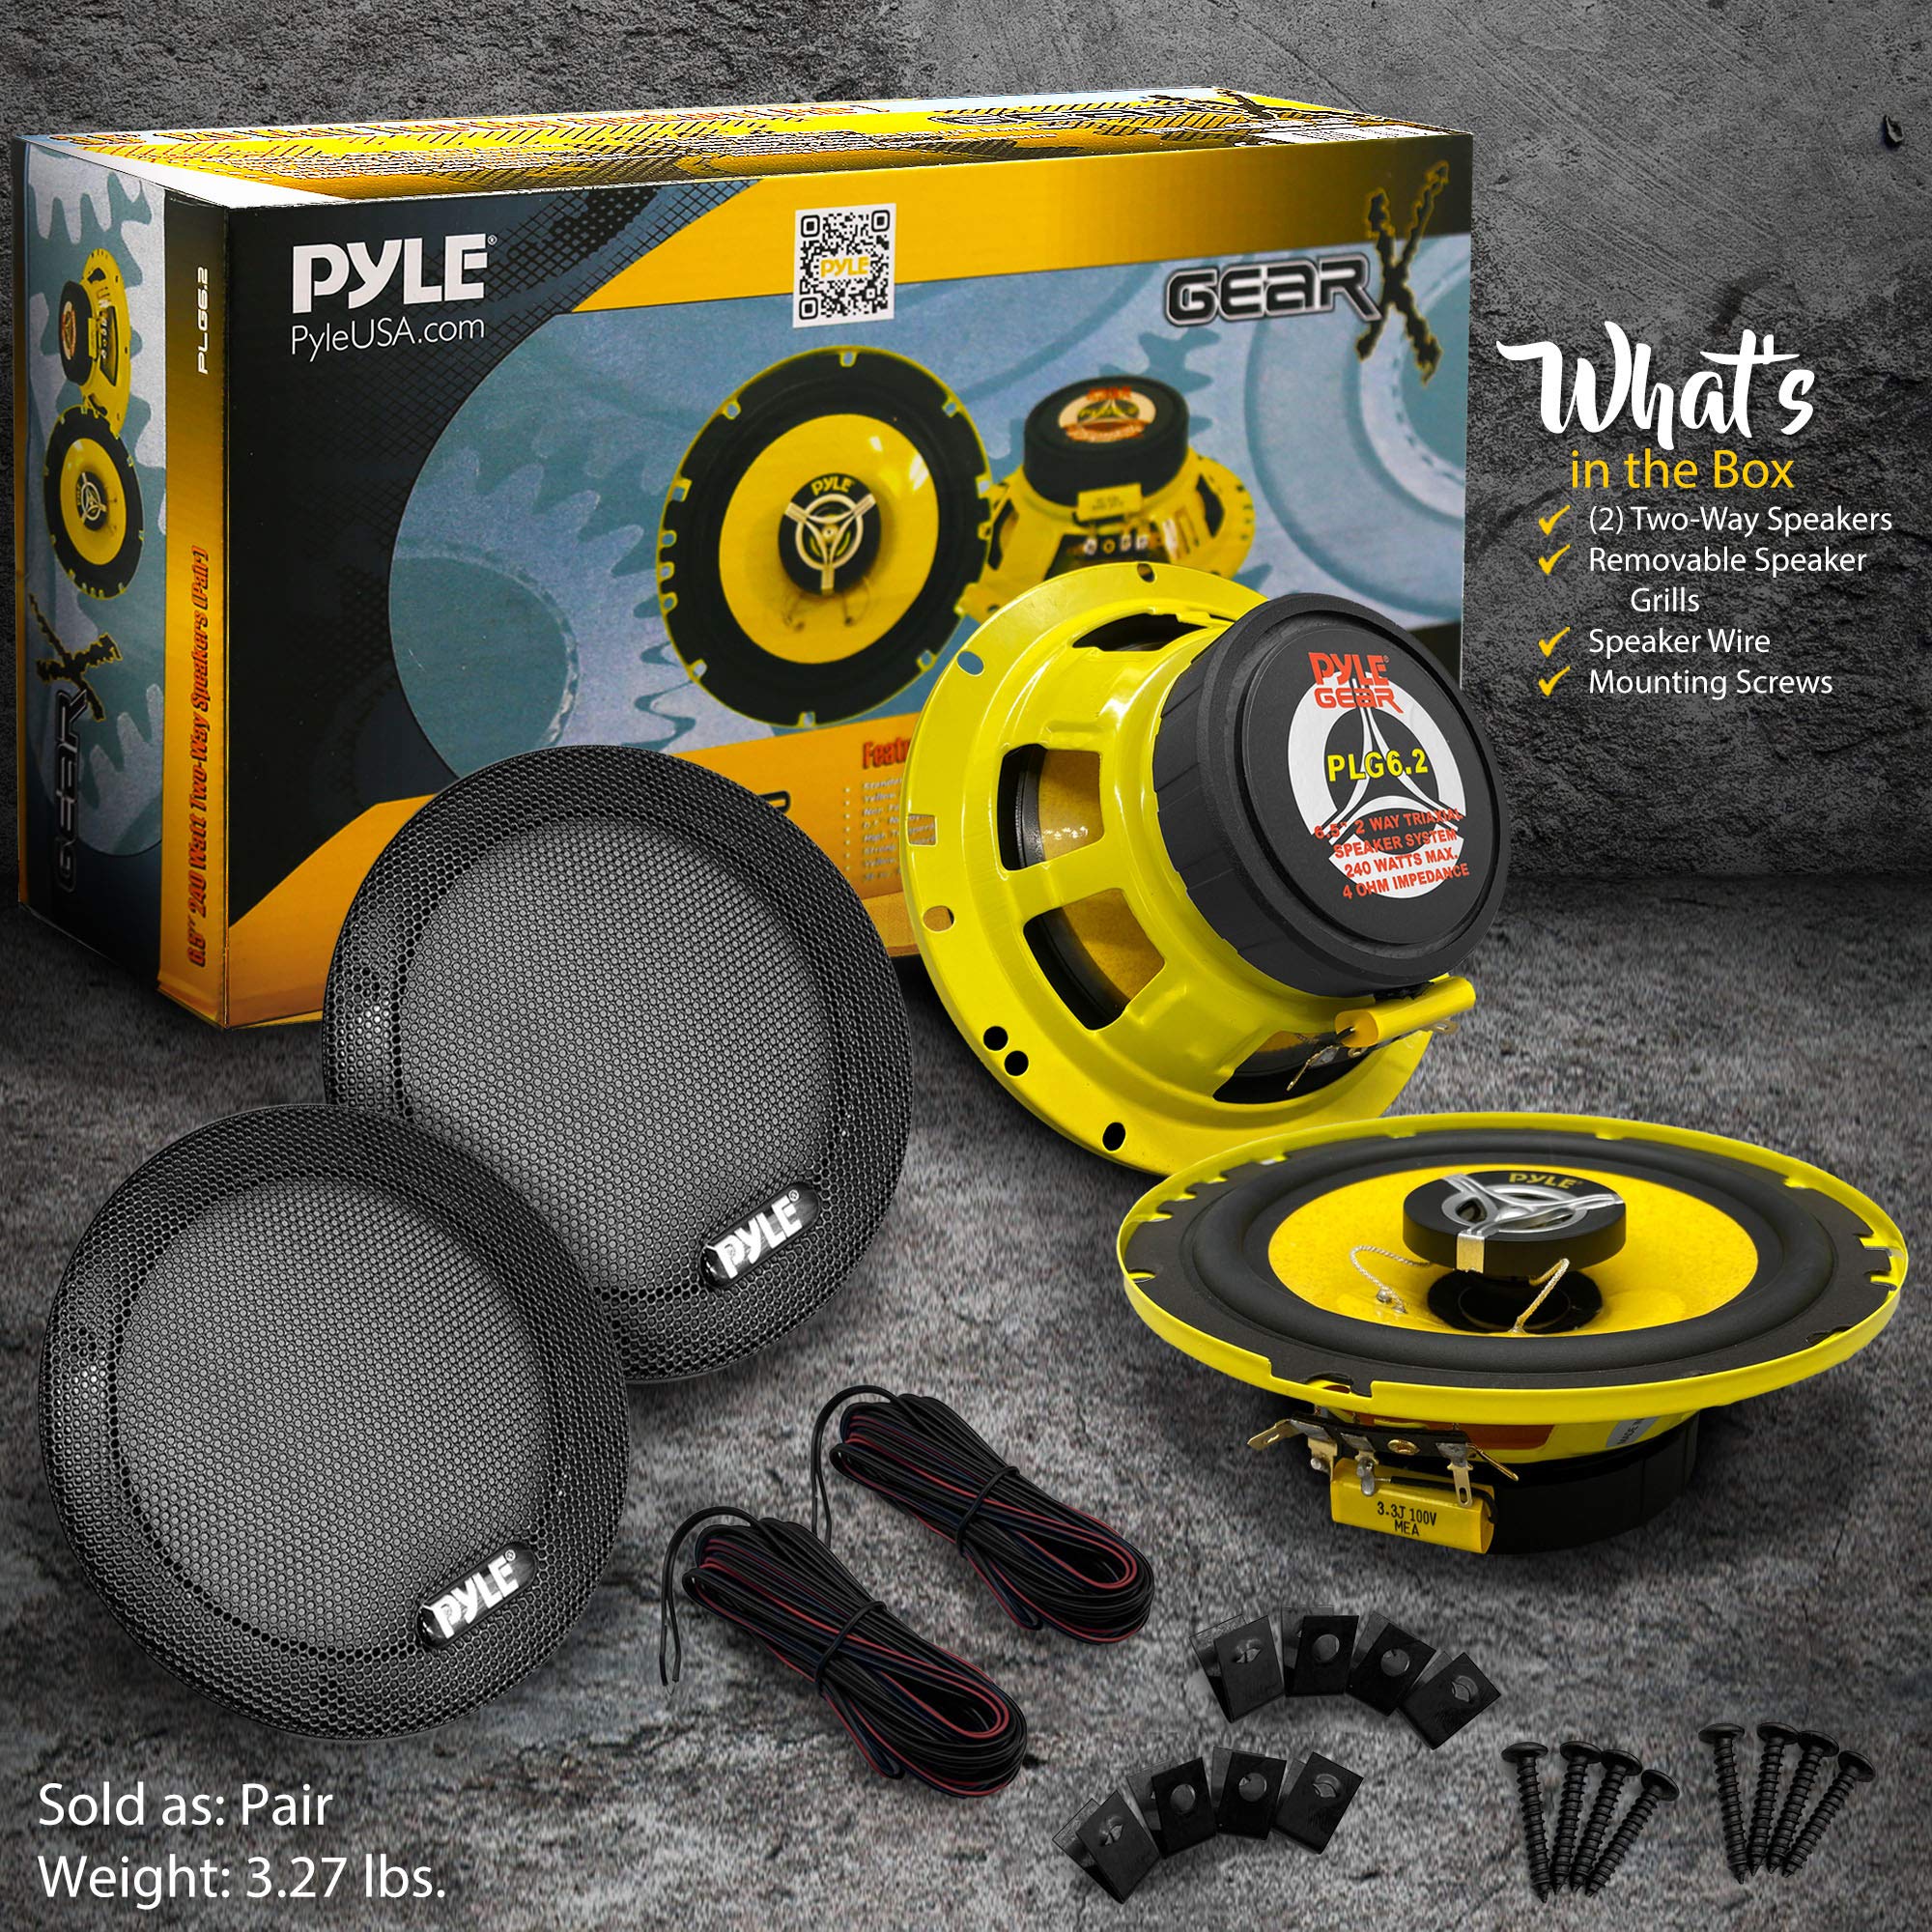 Pyle Car Two Way Speaker System - Pro 6.5 Inch 240 Watt 4 Ohm Mid Tweeter-Audio Sound Speakers For Car Stereo w/ 30 Oz Magnet Structure, 2.25” Mount Depth Fits Standard OEM -PLG6.2 (Pair) Yellow